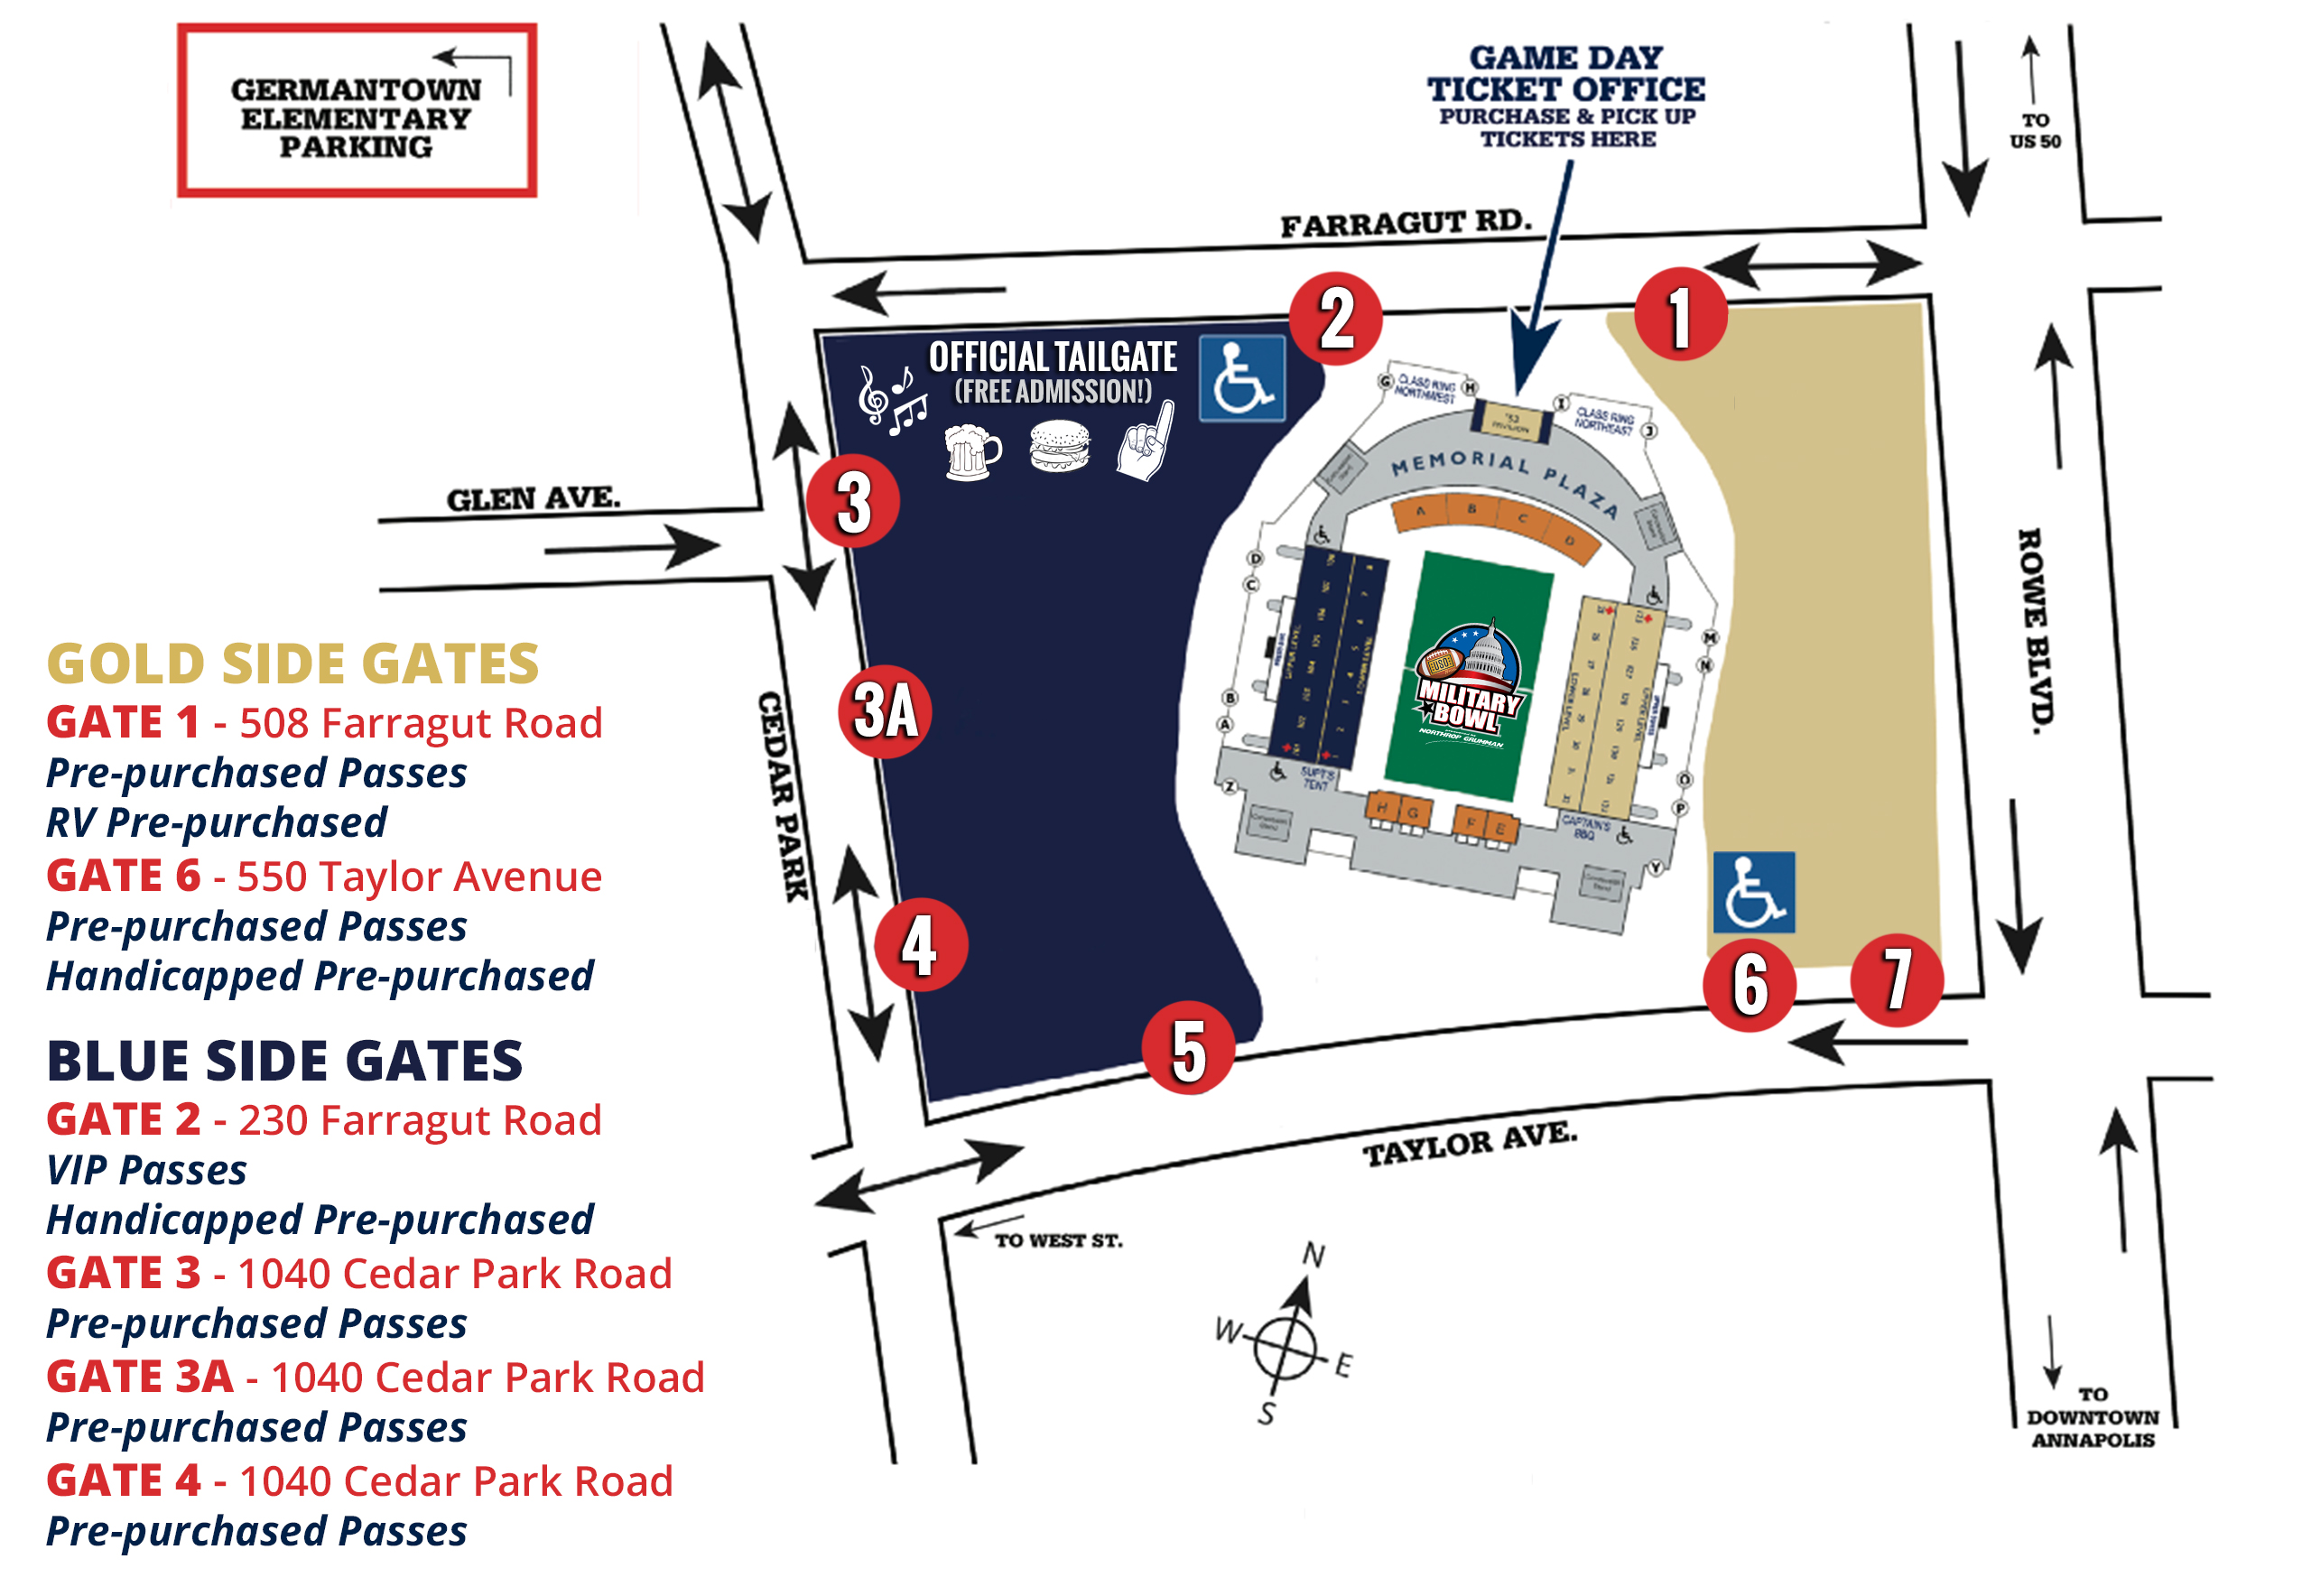 Parking map 2016 | Military Bowl